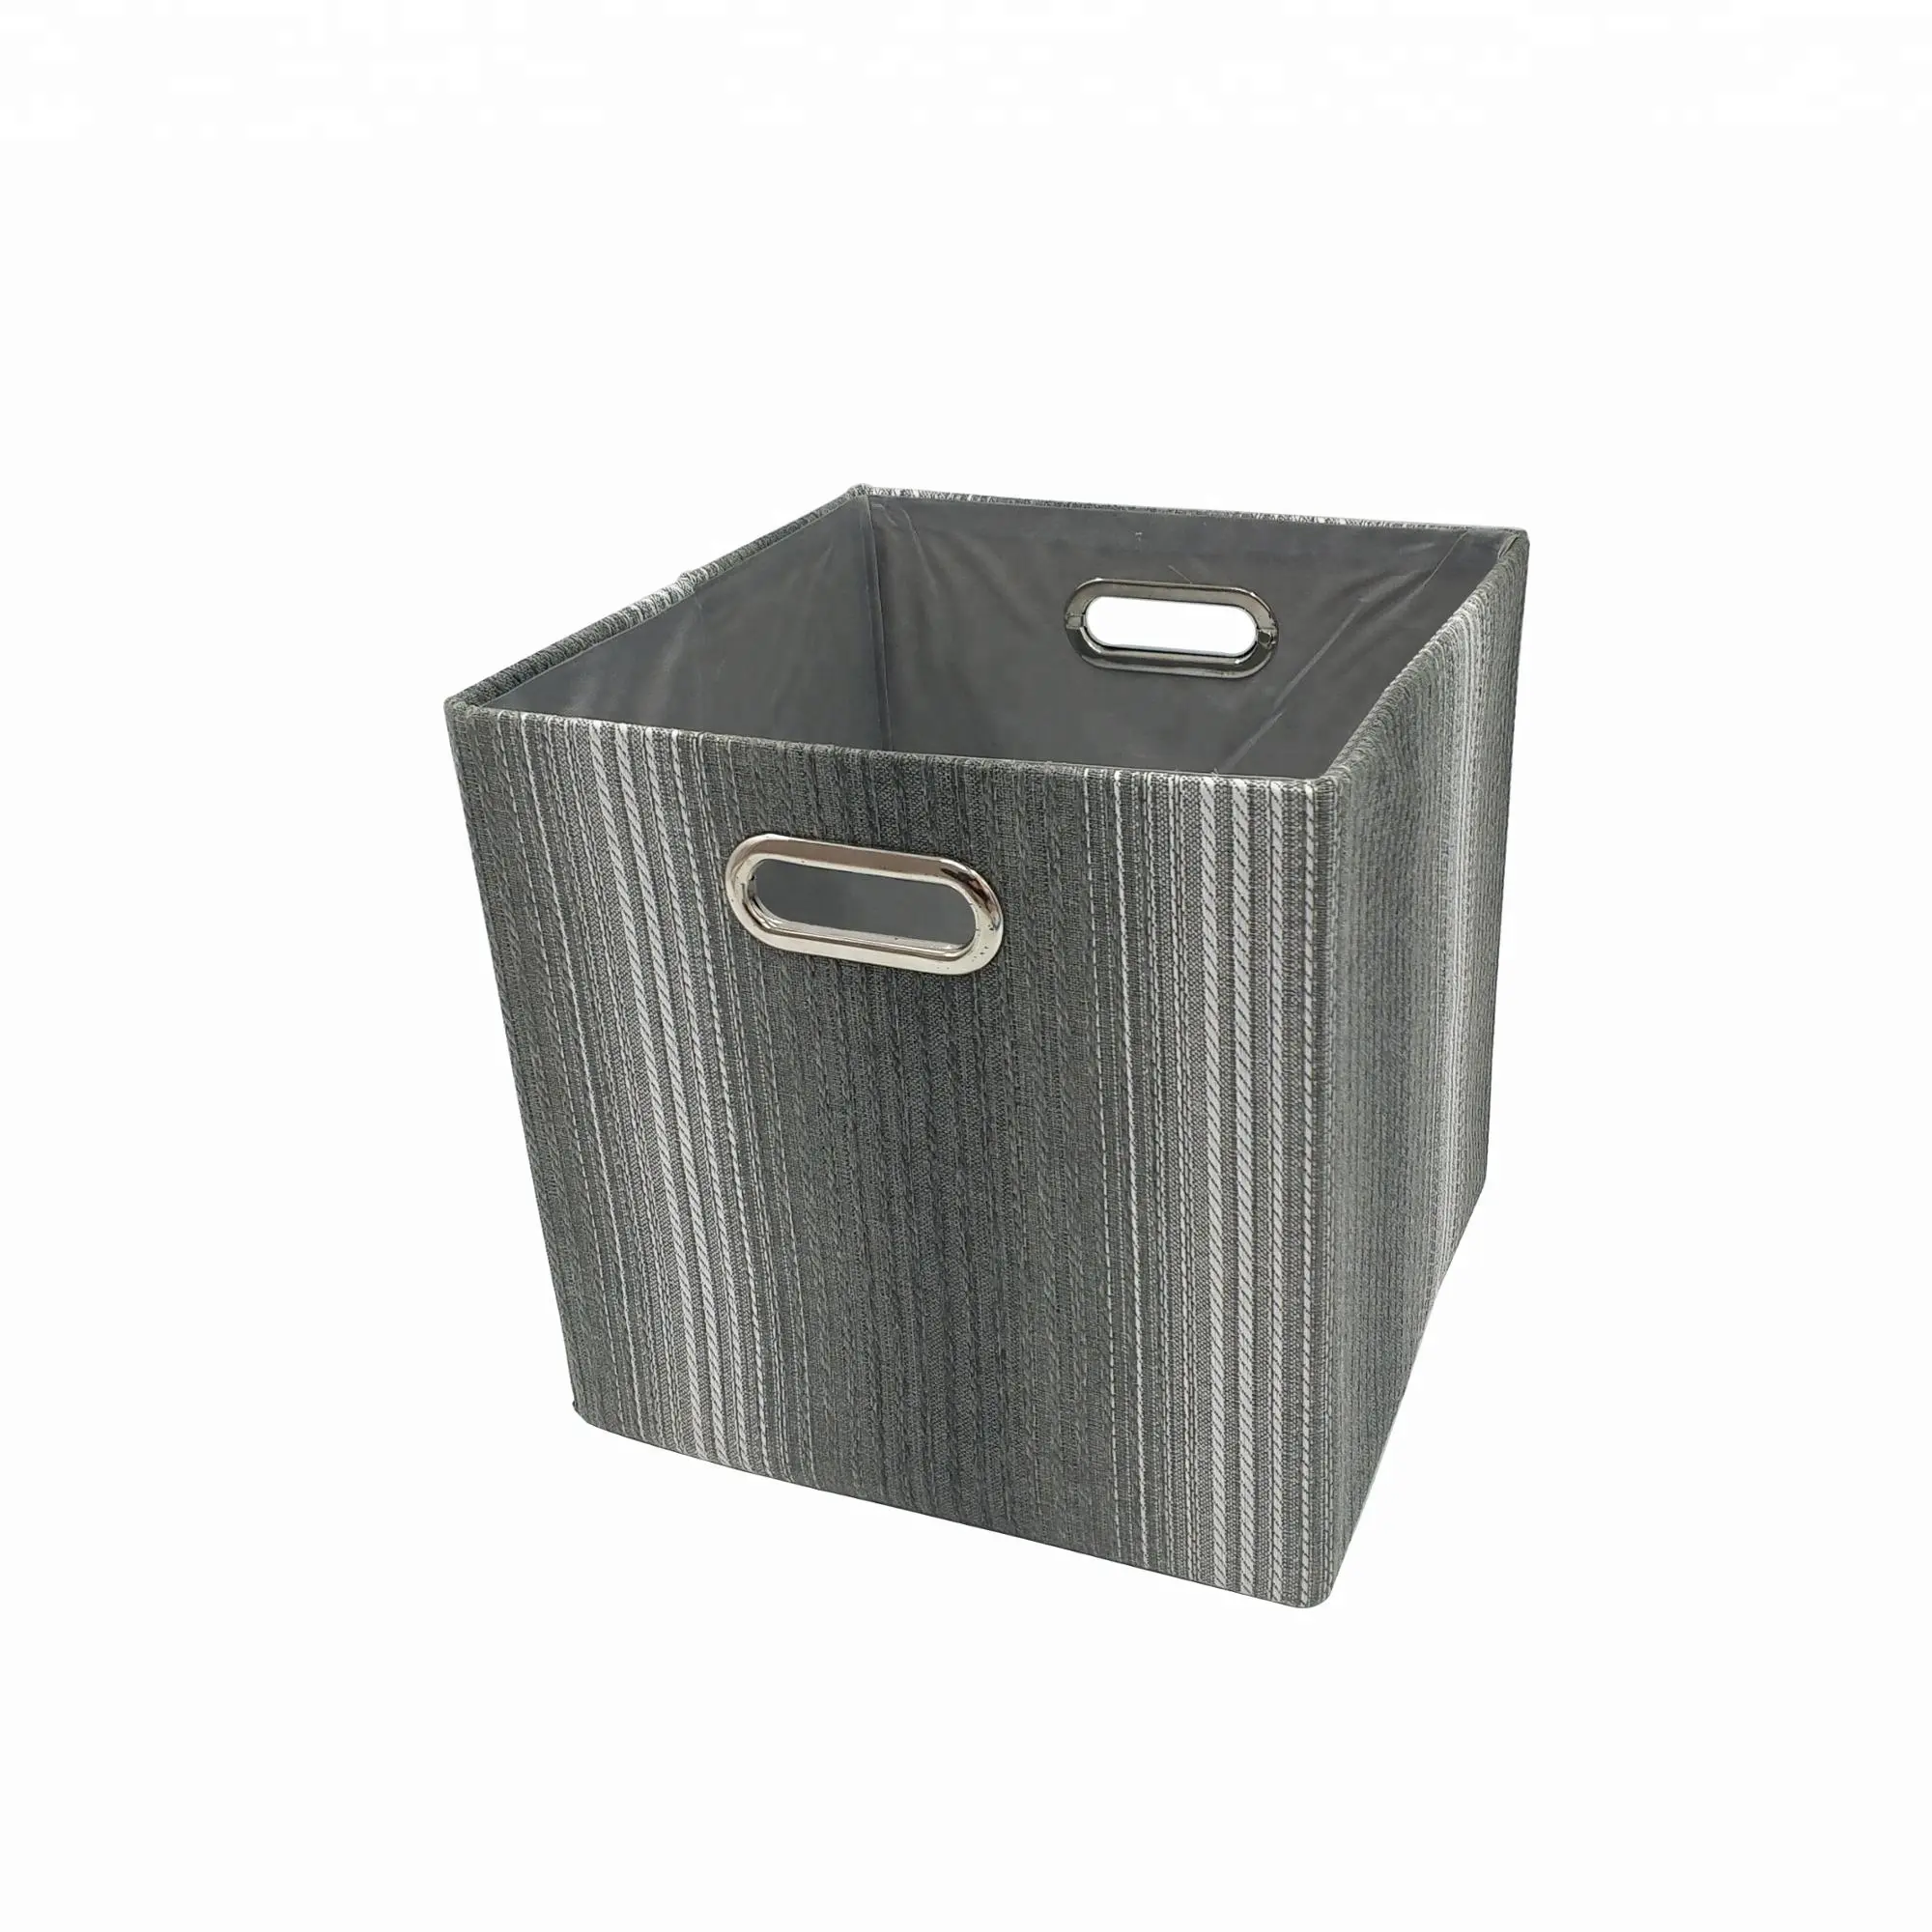 Wholesale and high quality flannelette folding storage box, metal handle design, make the product durable, kubei box.